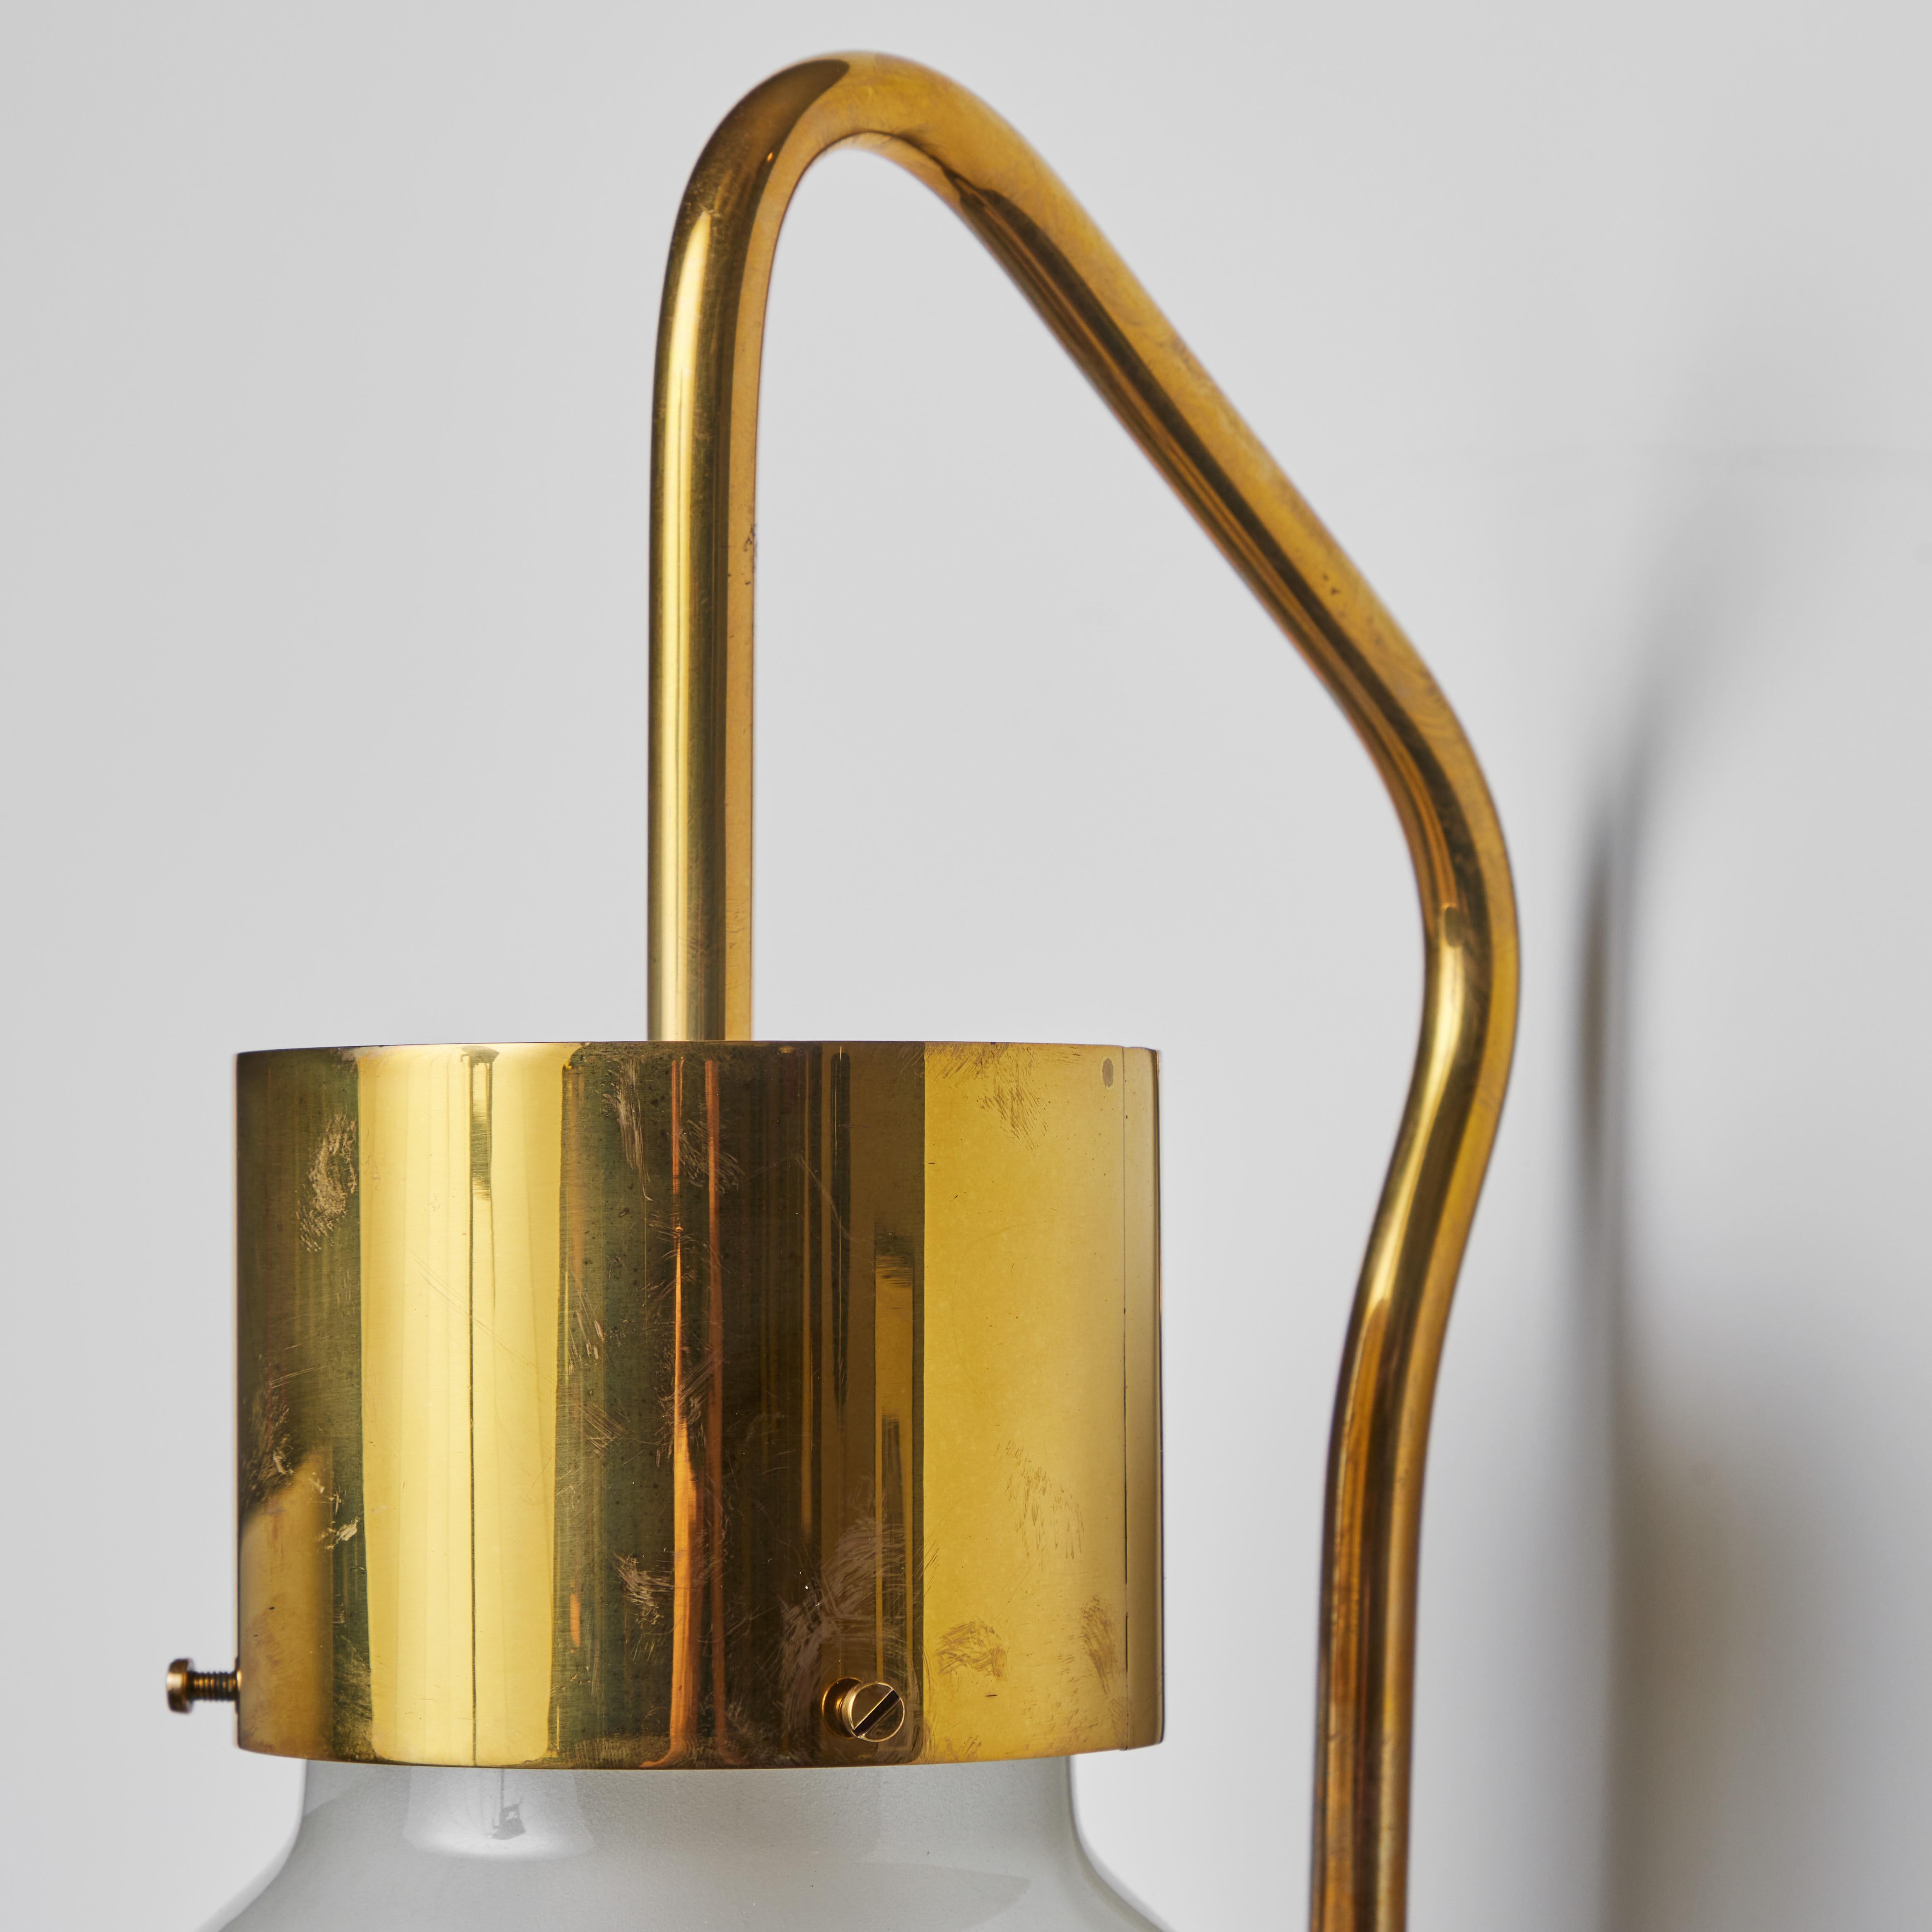 Large 1950s Luigi Caccia Dominioni 'LP 10' wall light for Azucena. Exceptionally rare and beautifully sculptural wall lamps executed in architectural brass and opaline glass, Italy, circa 1958. An incredibly refined and still quite modern design by